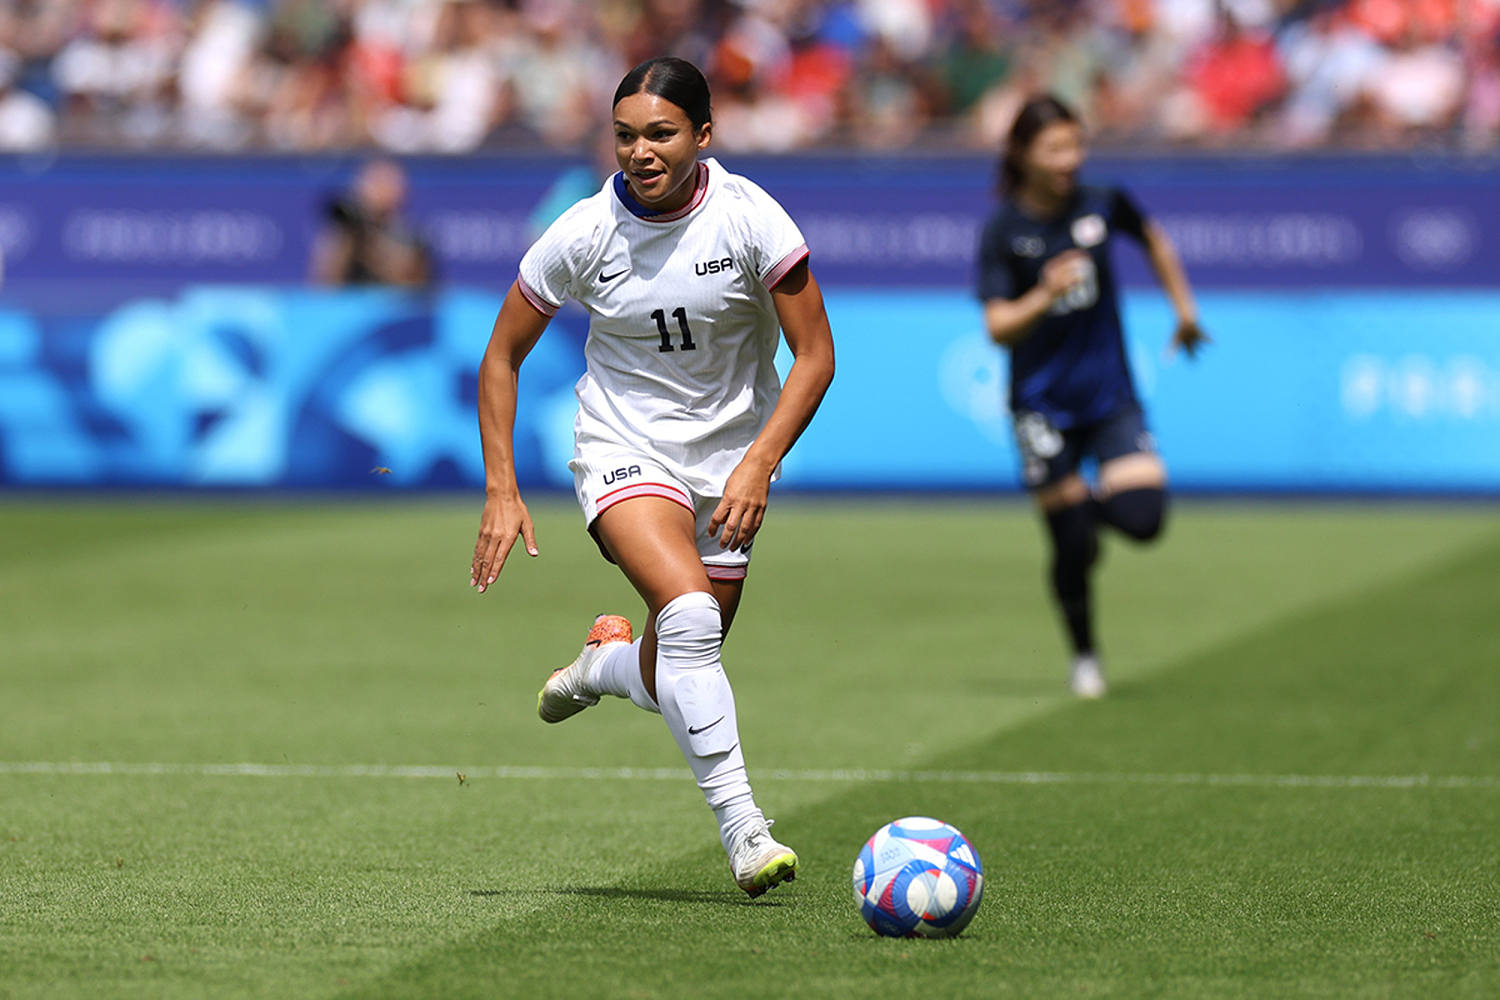 It's an Olympic rematch for the U.S. and Germany as women's soccer moves into semifinals